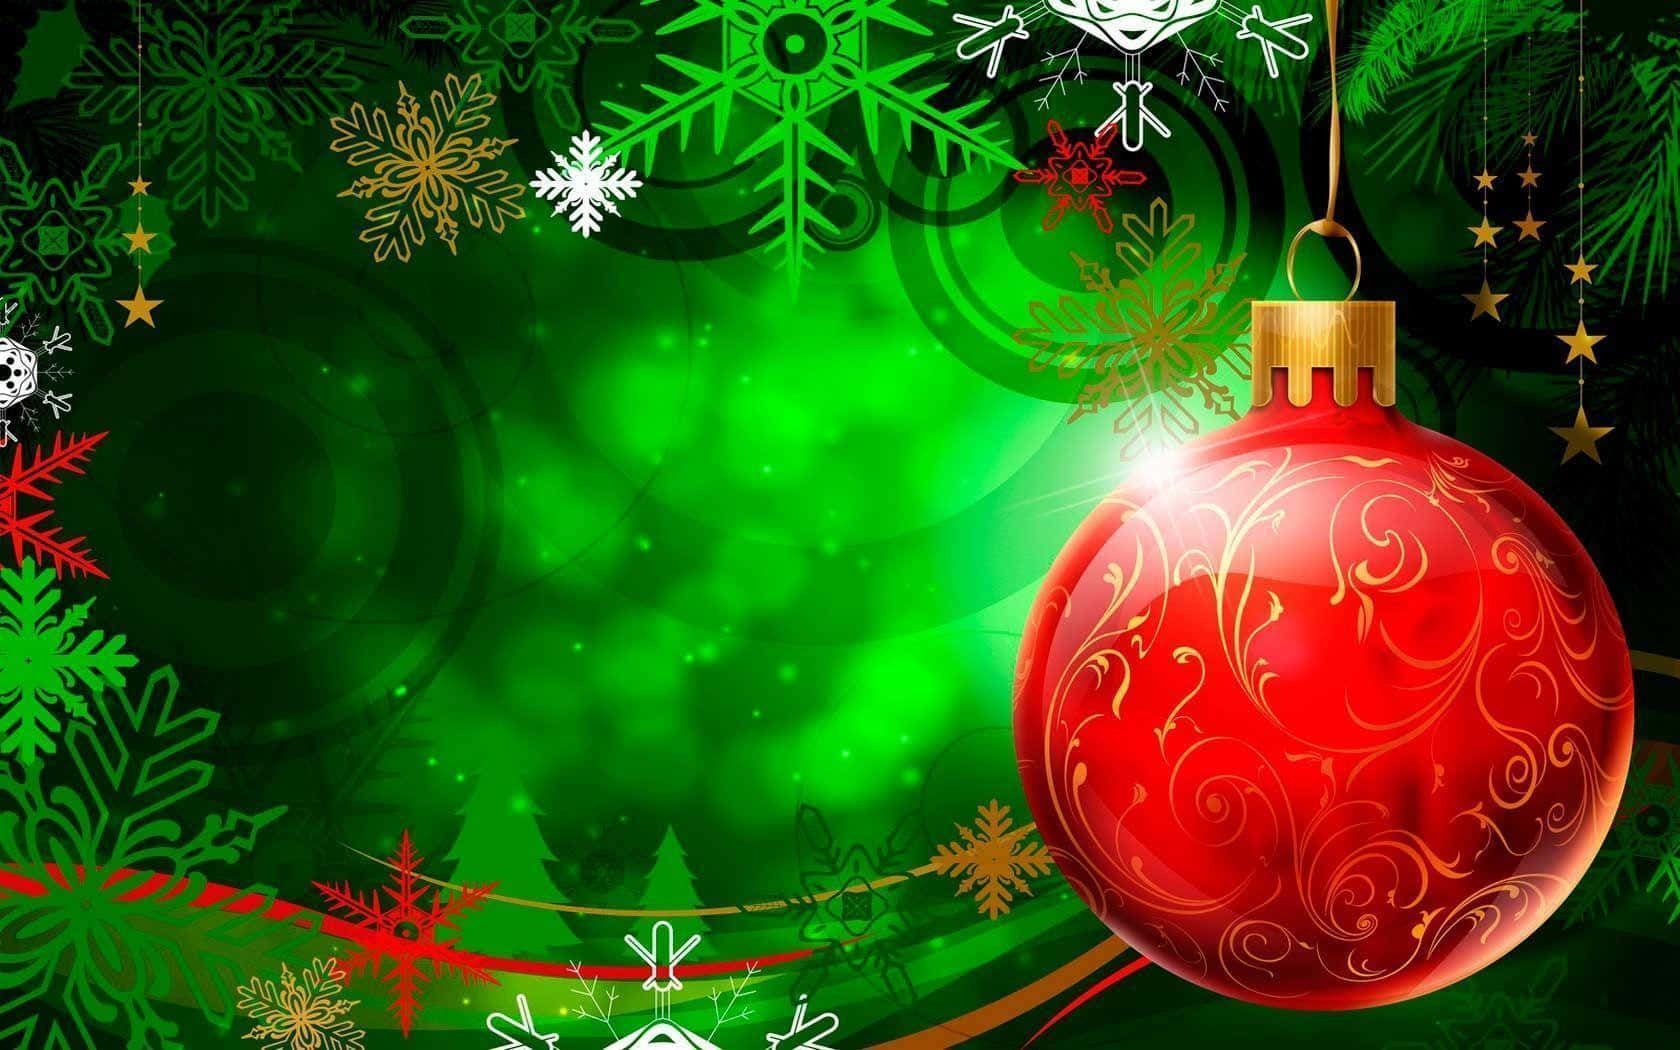 Festive 3D Christmas Tree Lights and Ornaments Wallpaper